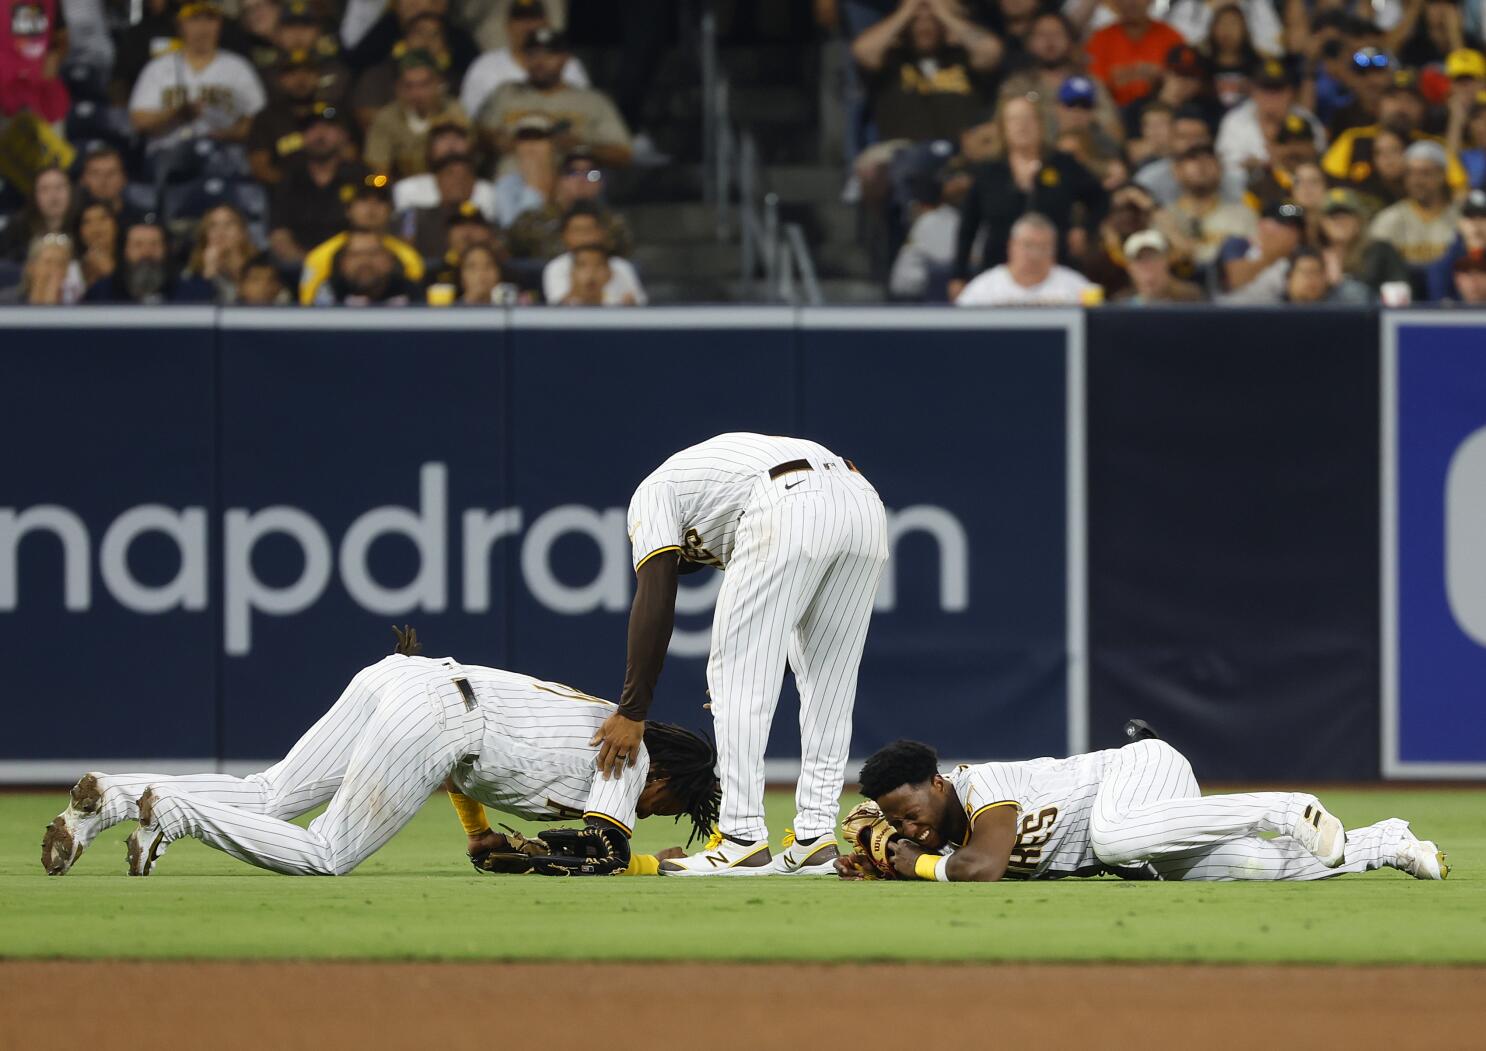 Profar collapses after collision; Padres beat Giants in 10 - The